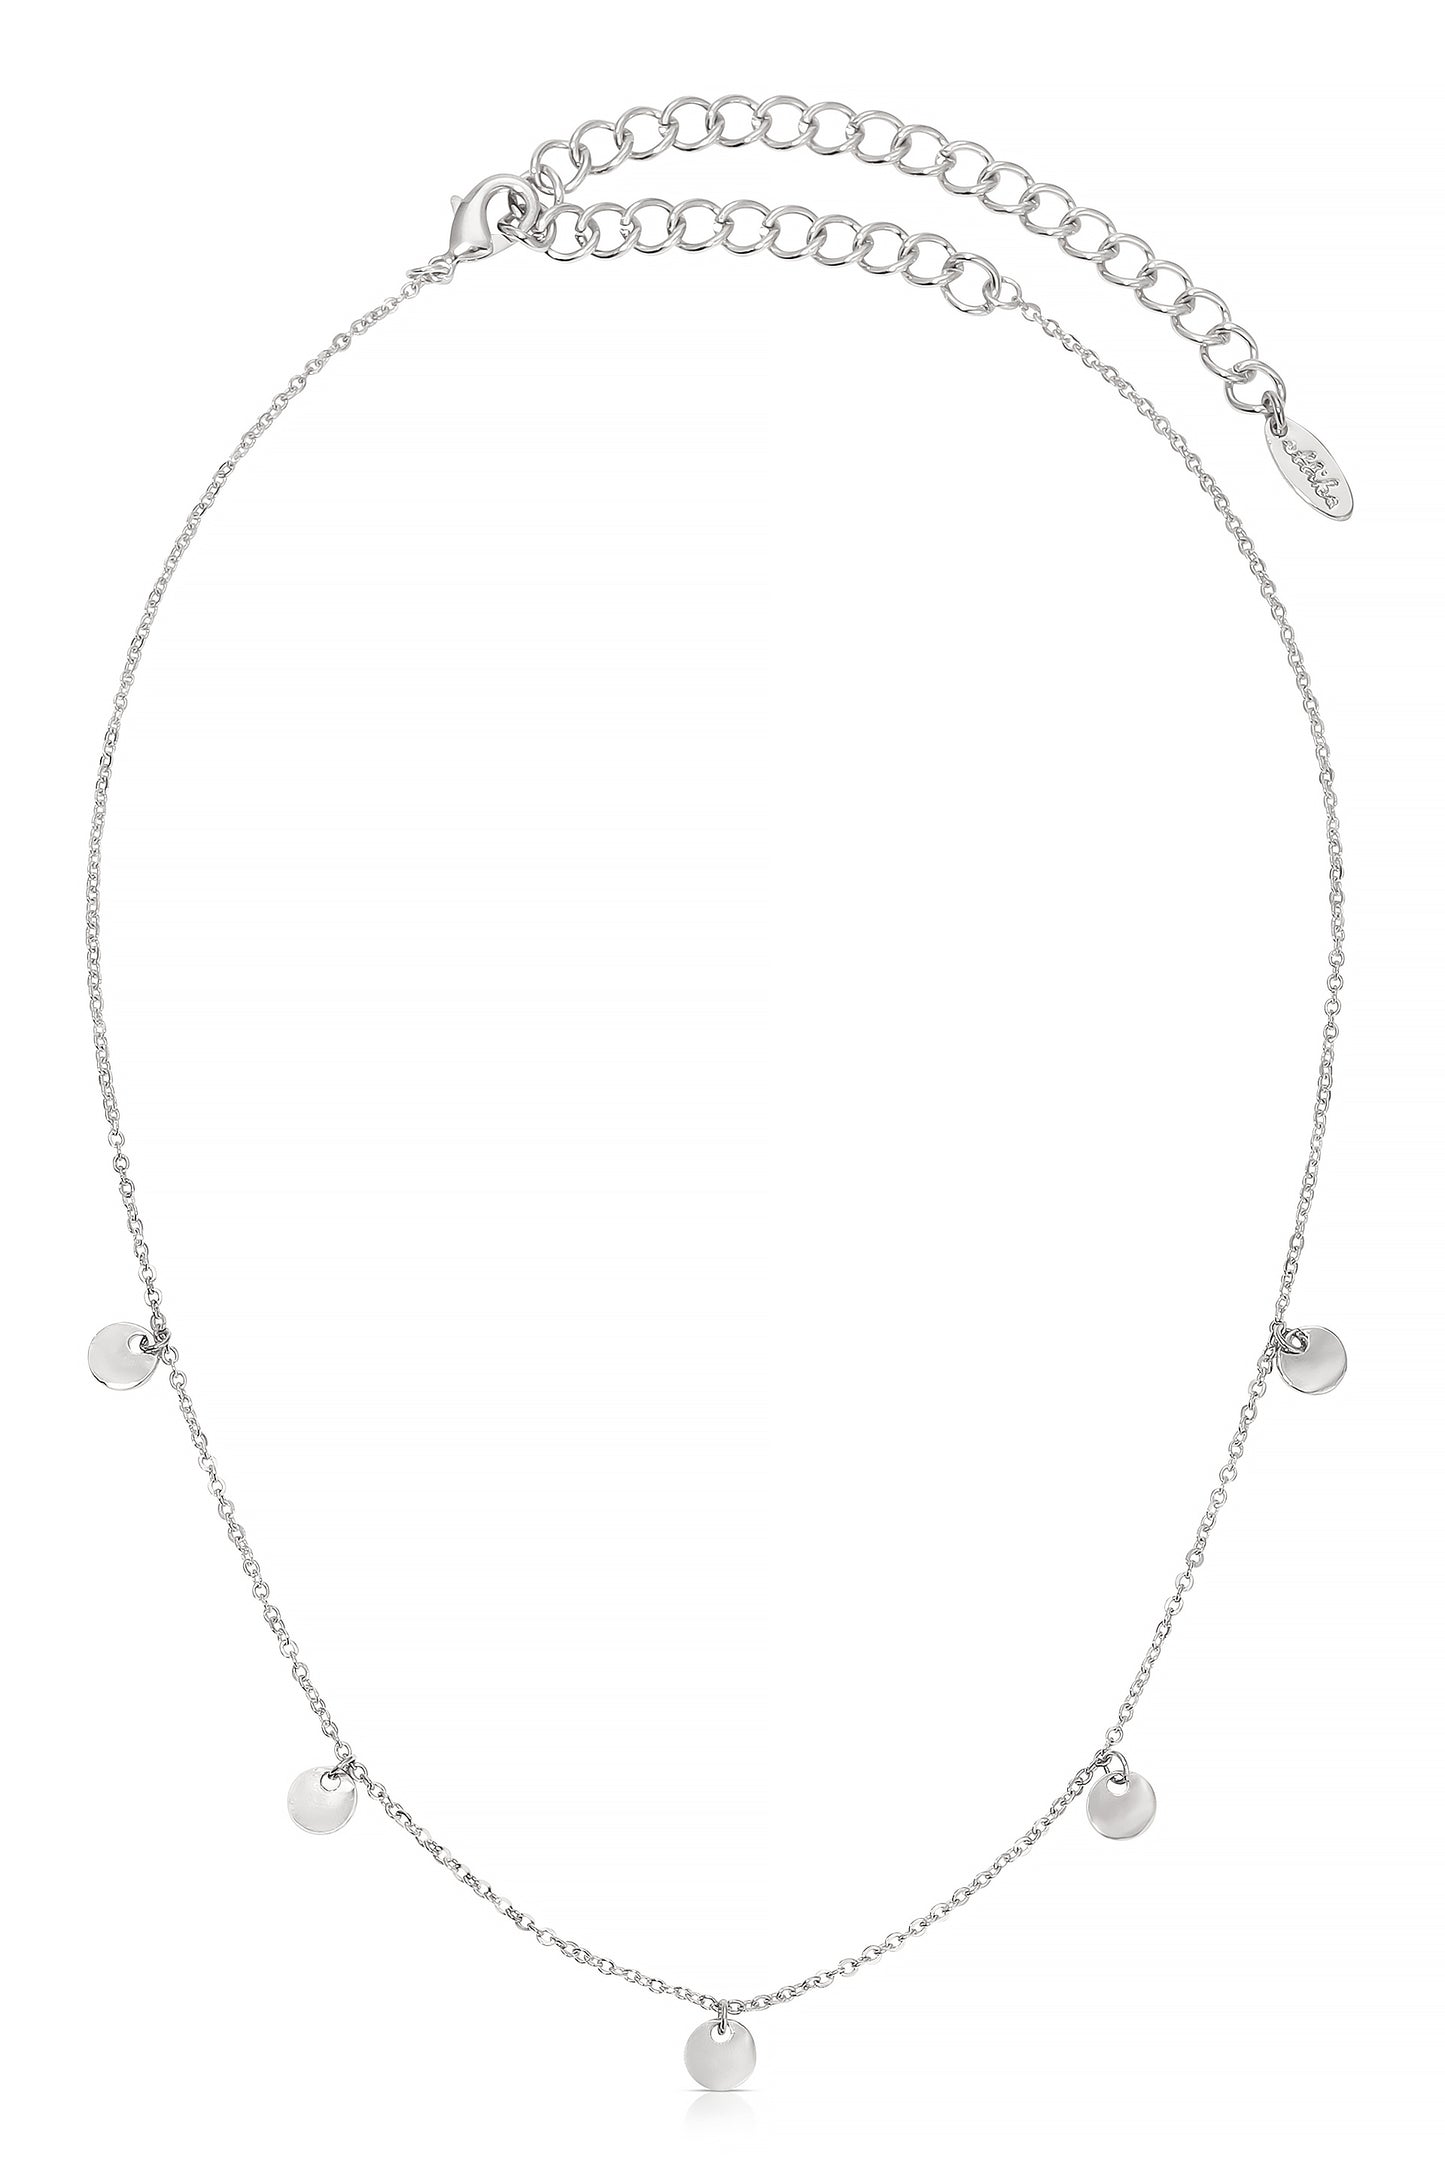 All in Layered Crystal Necklace Set in rhodium 2